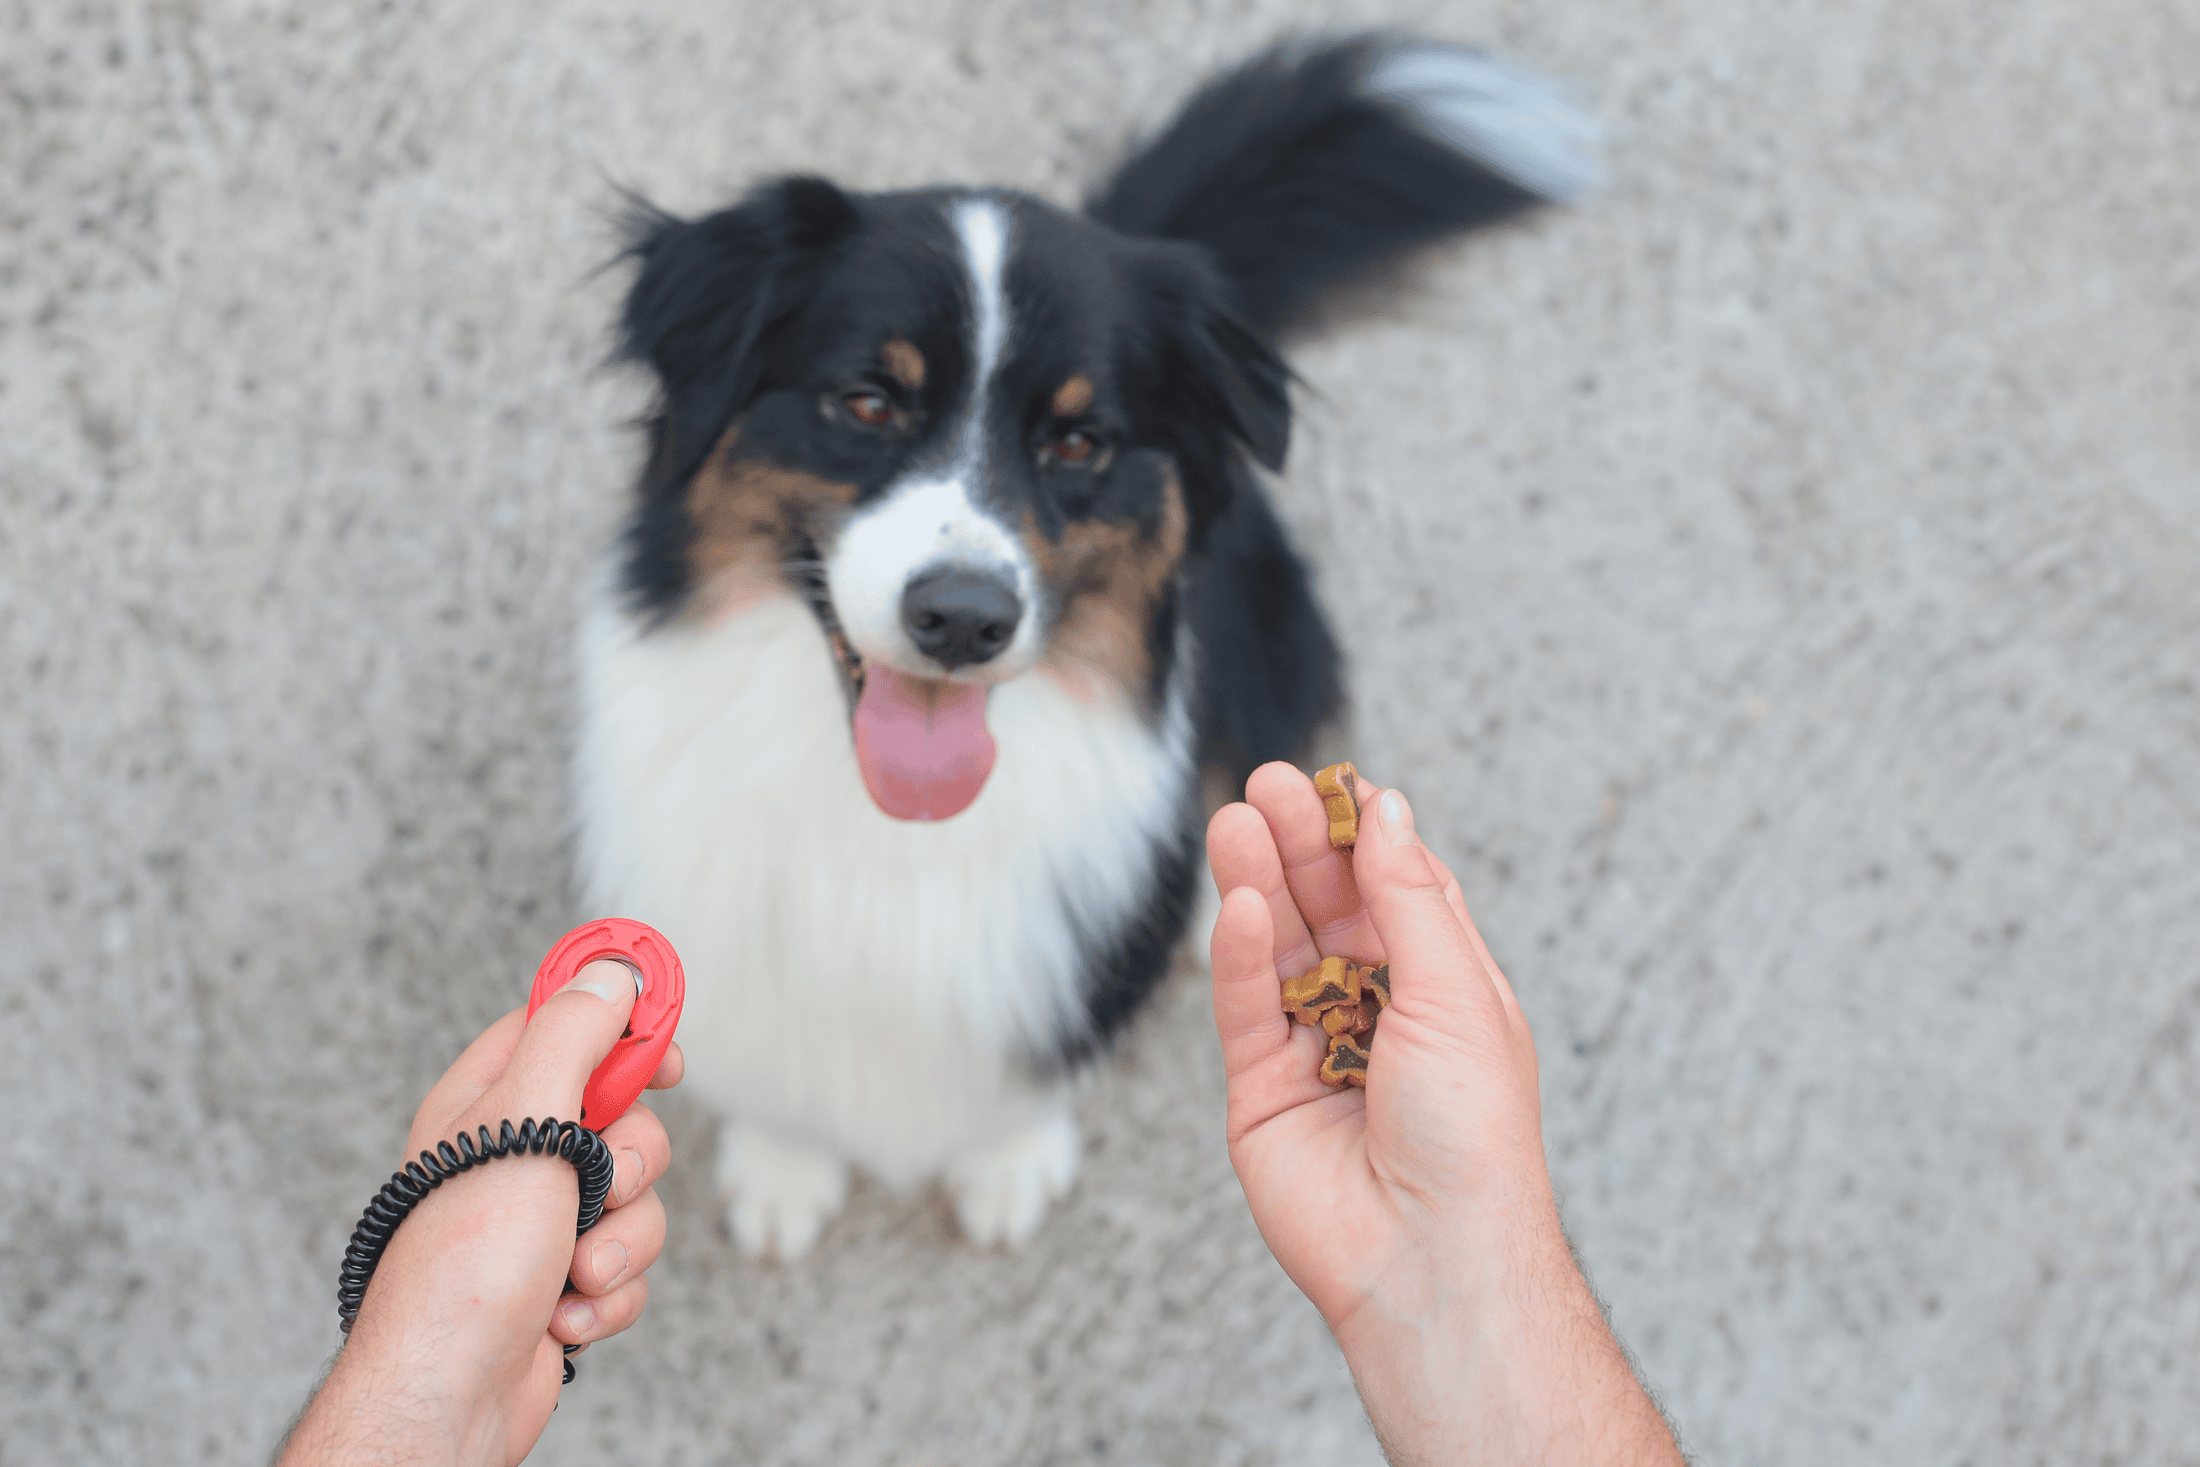 Dog cƒlicker training is how you reinforce basic commands like if your dog sits when you ask. Use a dog training clicker to clicker train your puppy.